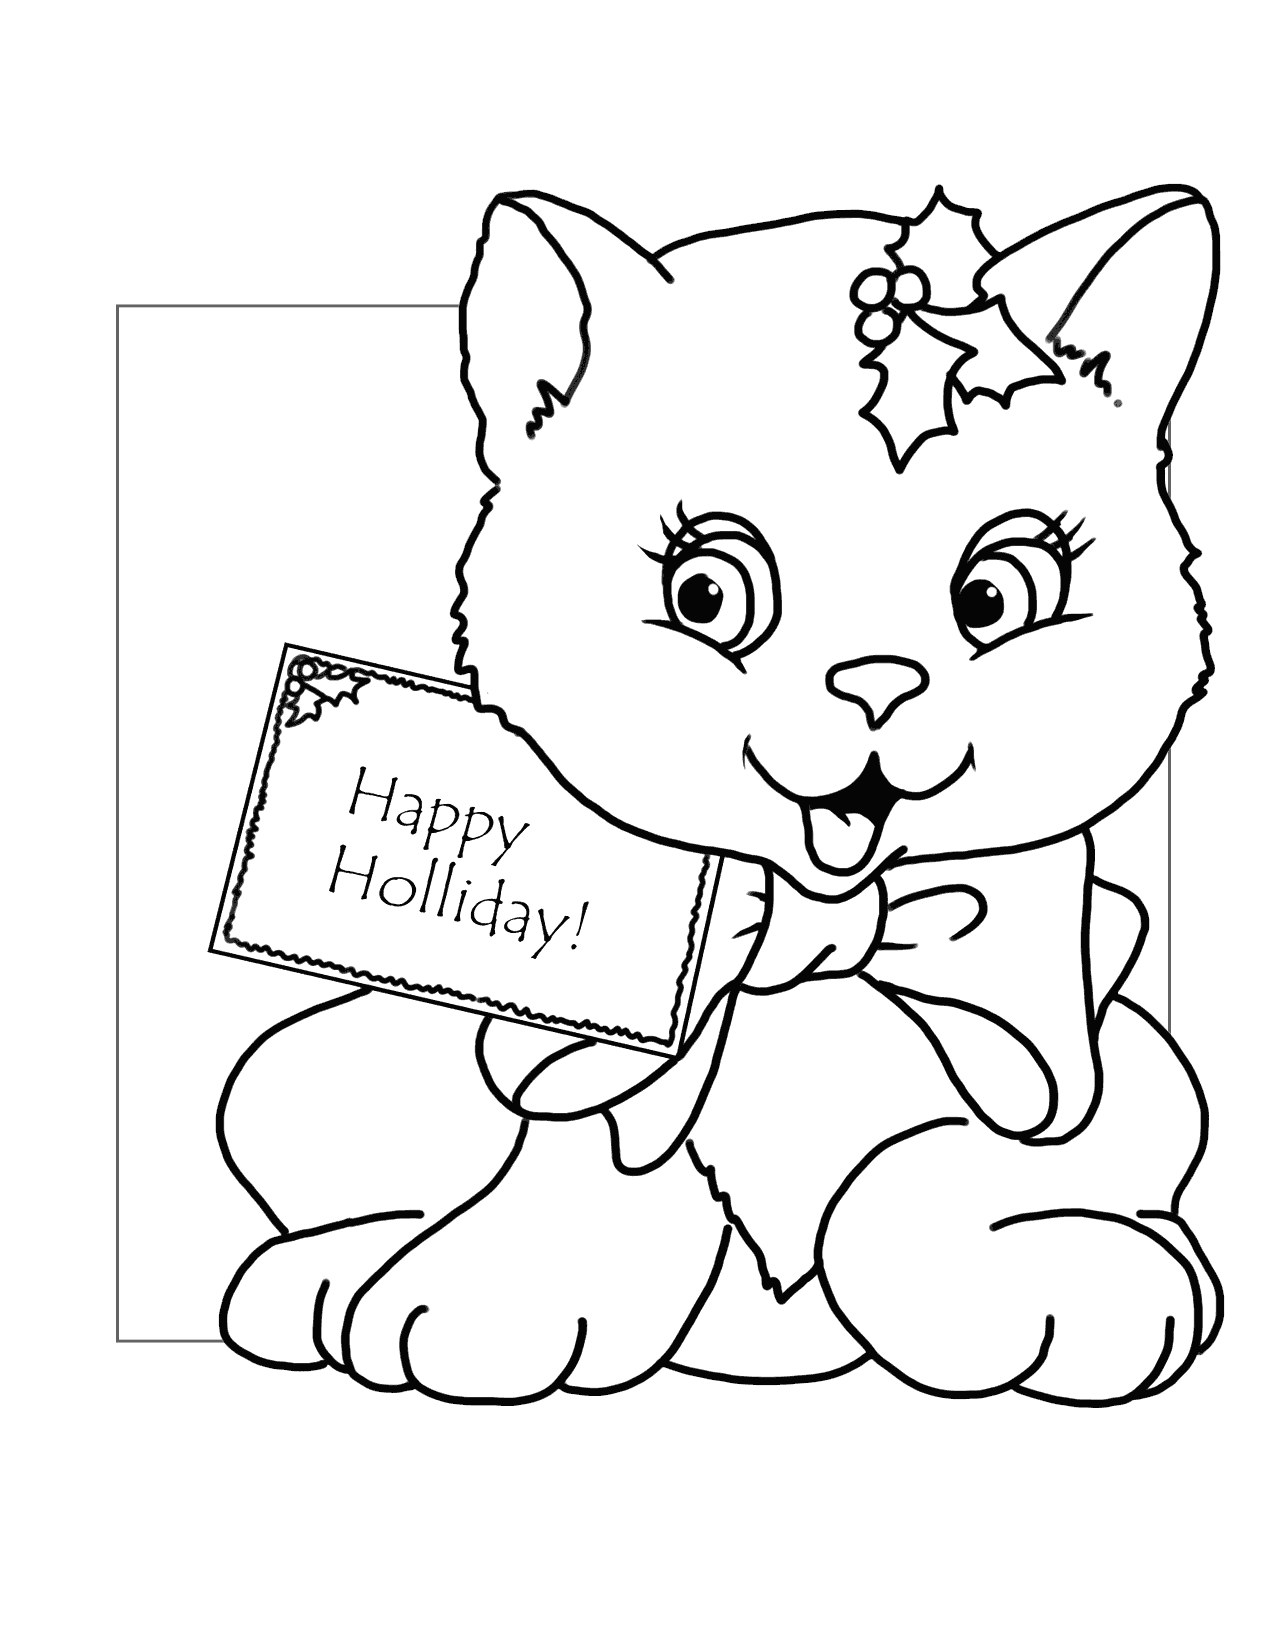 Cute Kitten For Christmas Coloring Page